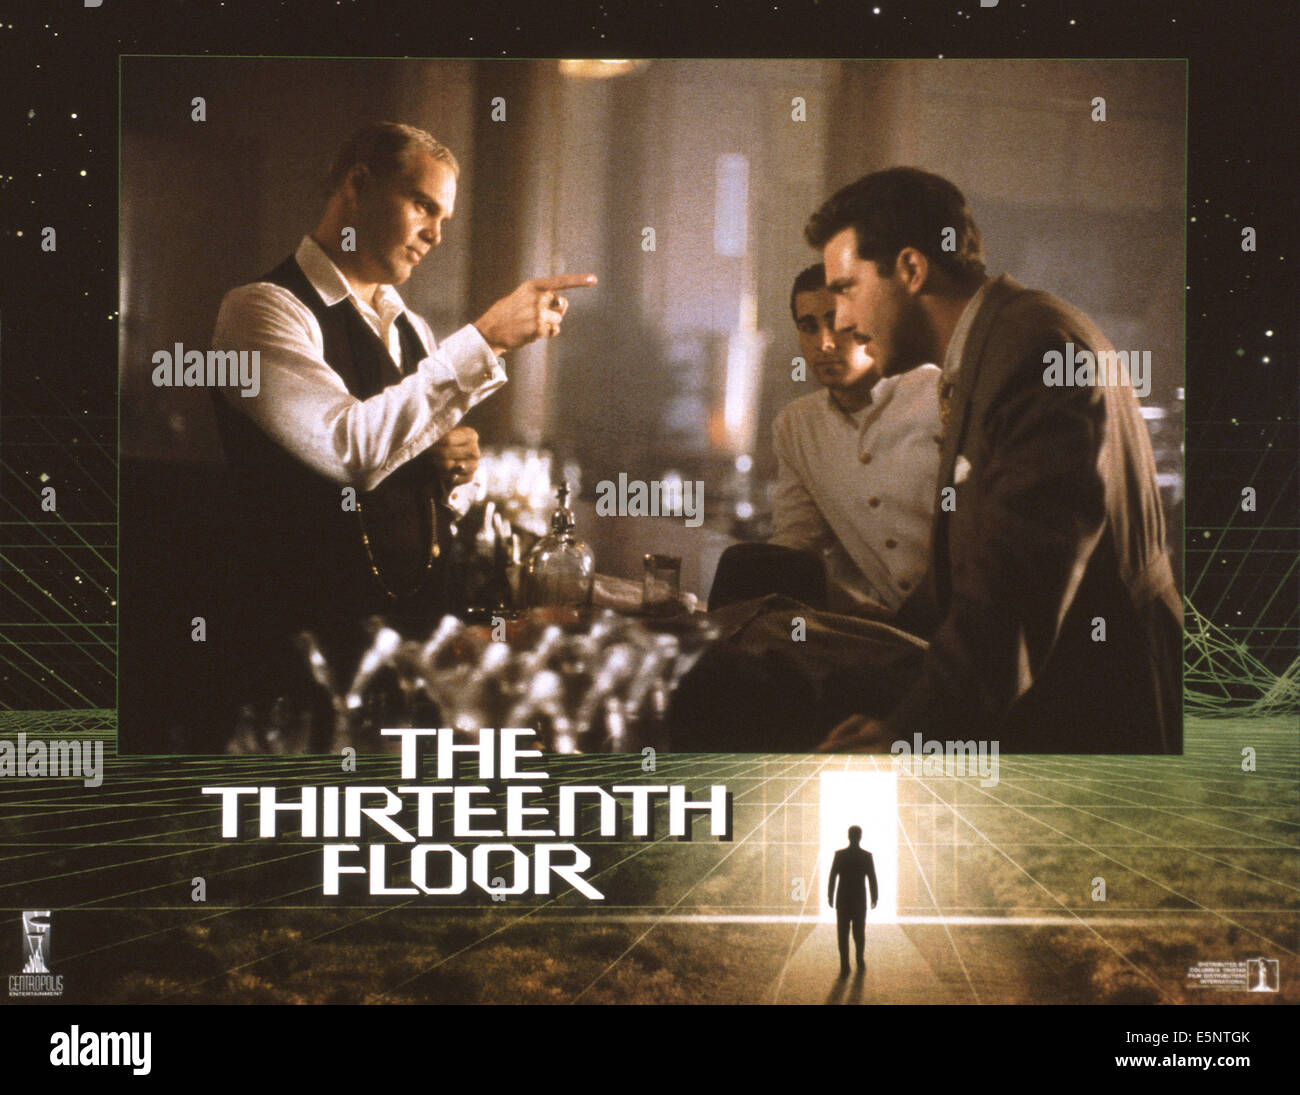 THE THIRTEENTH FLOOR, (aka 13TH FLOOR), US poster, from left: Vincent D'Onofrio, Craig Bierko, 1999, © Columbia/courtesy Stock Photo